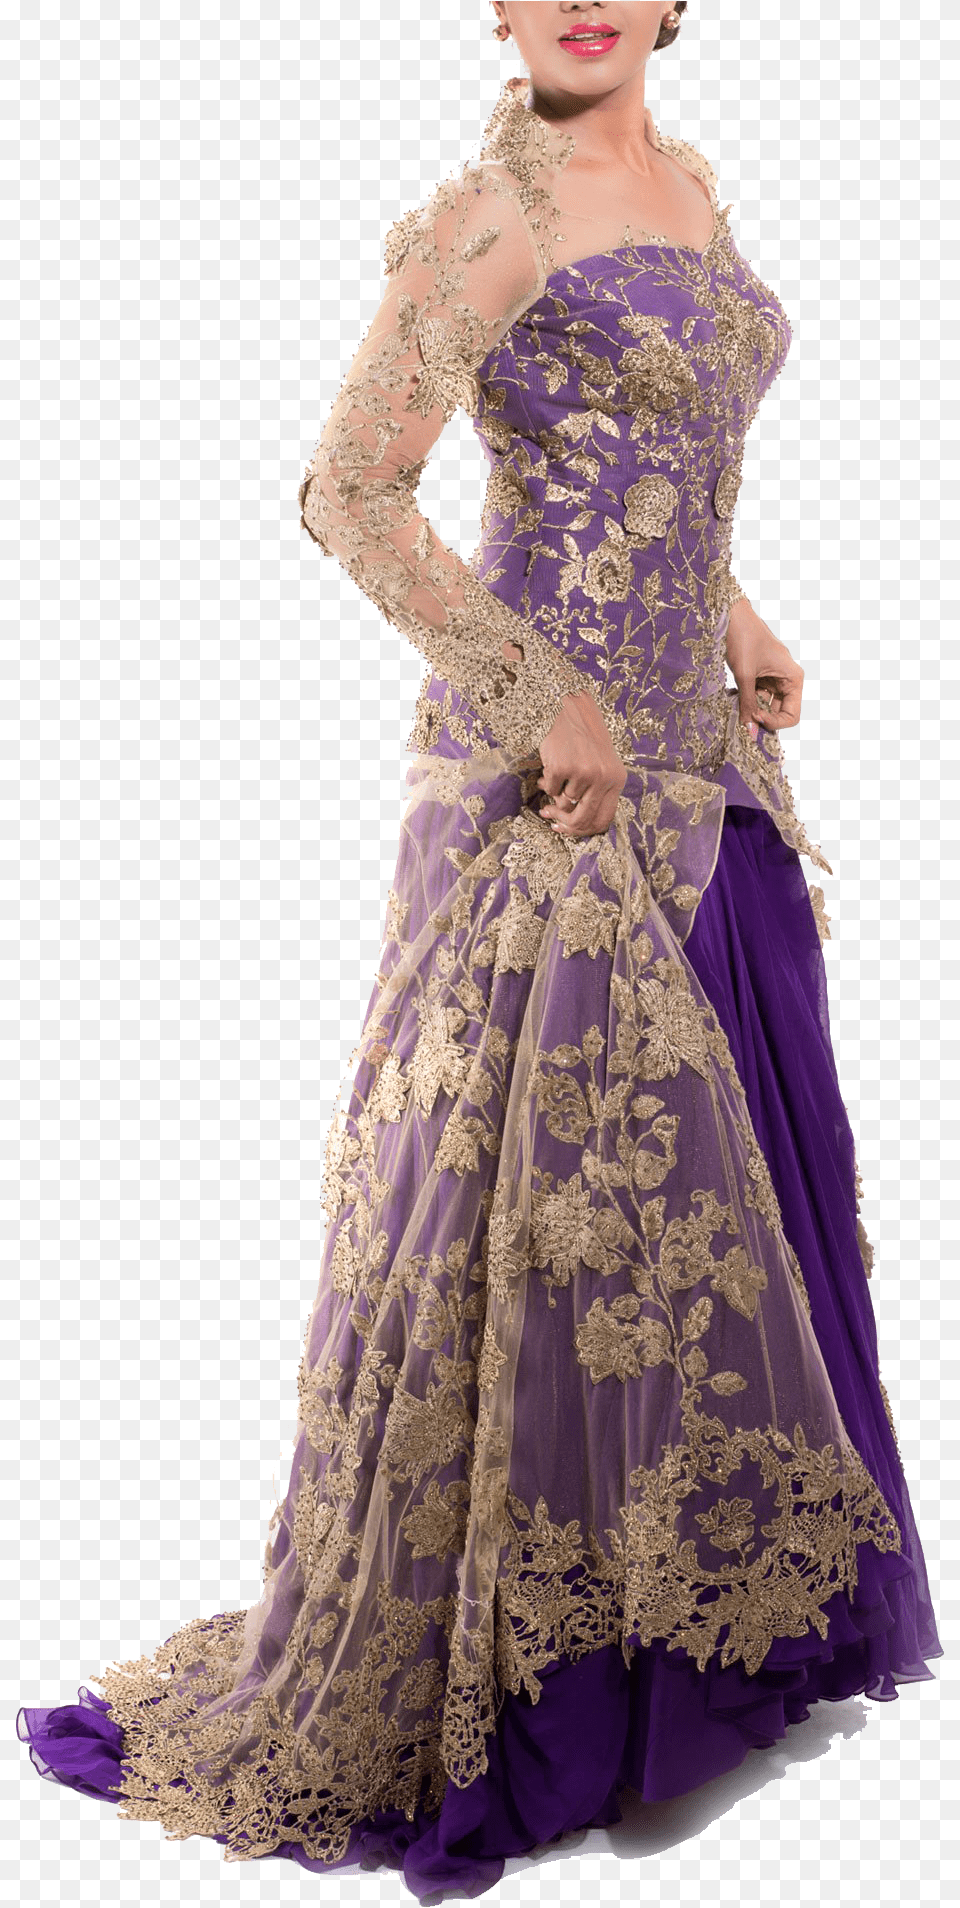 Purple Amp Gold Bridal Gown, Wedding Gown, Clothing, Dress, Evening Dress Png Image